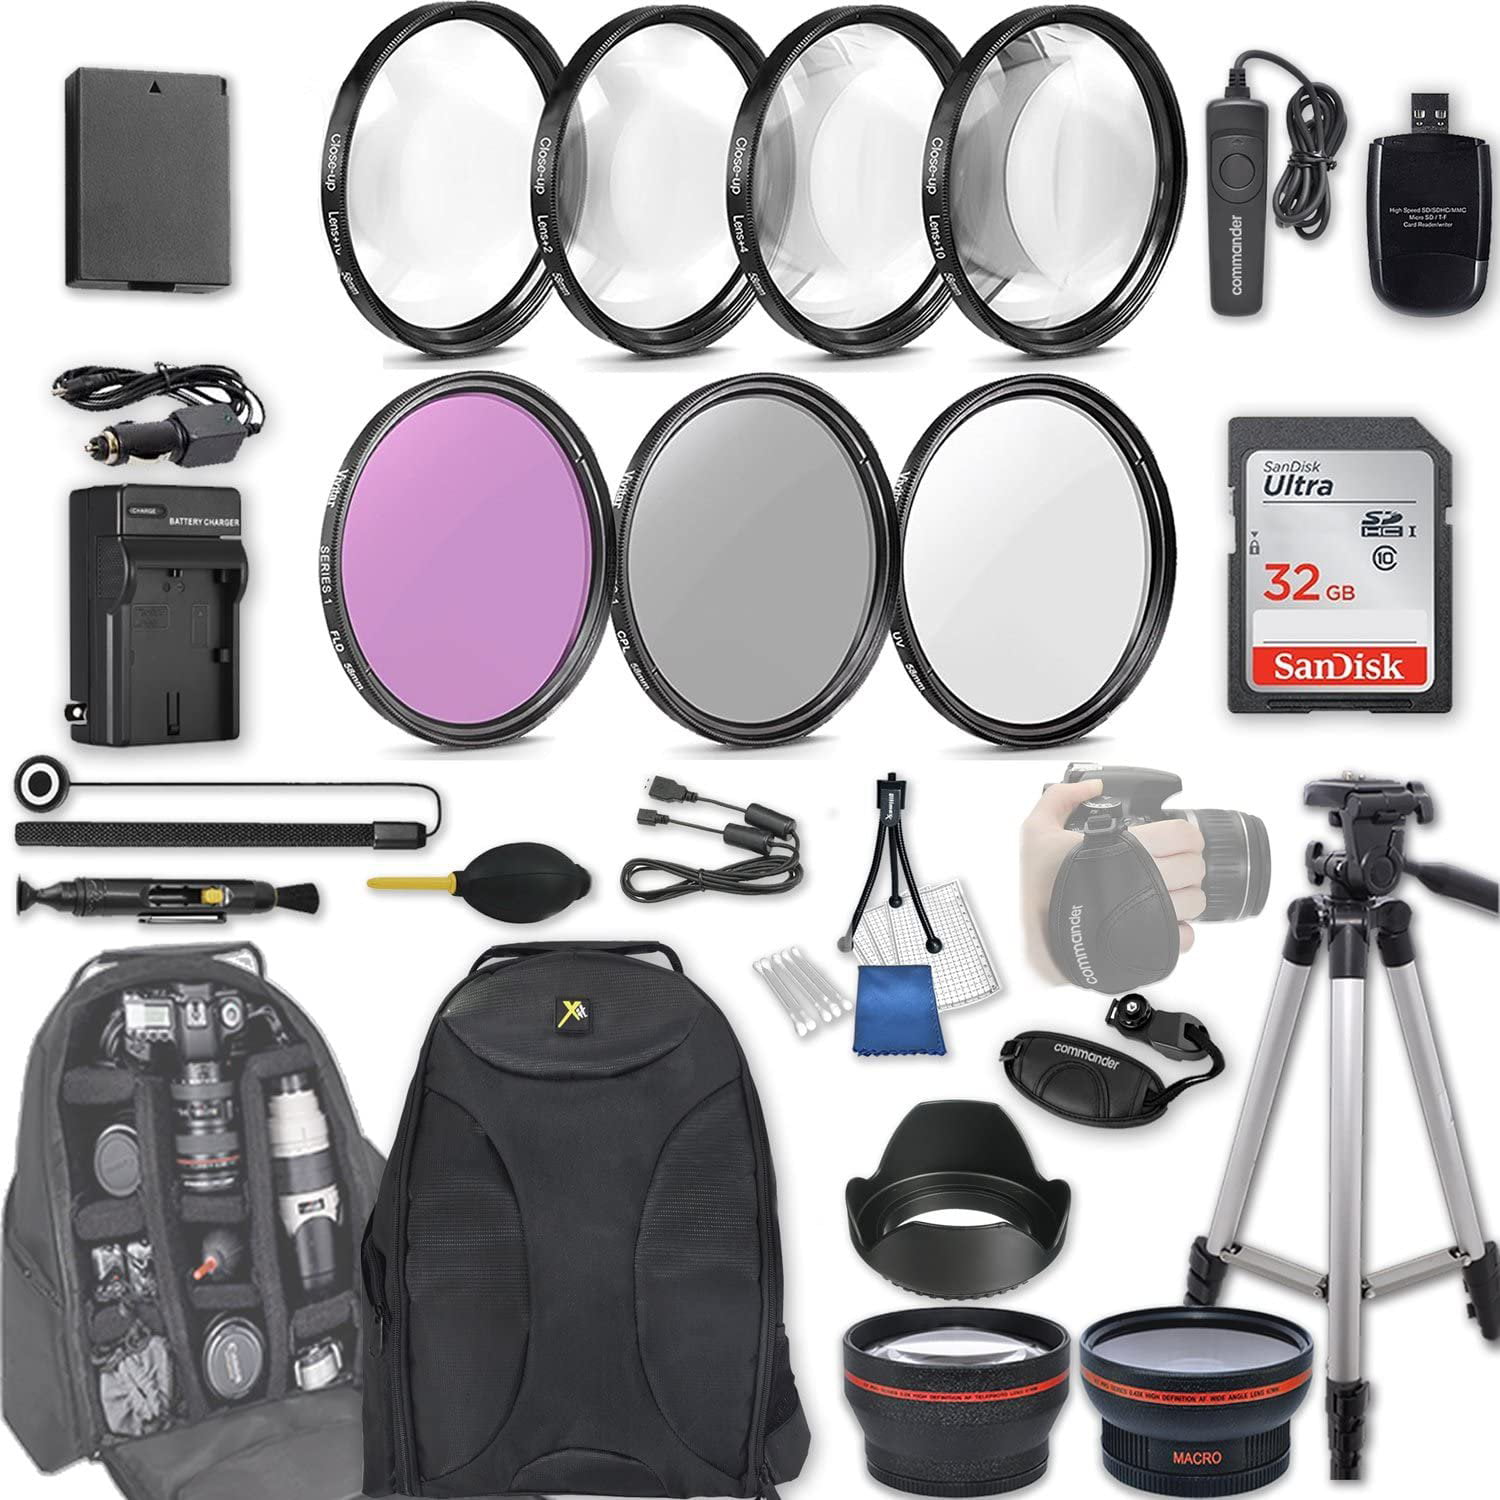 58mm 28 Pc Accessory Kit for Canon EOS Rebel T7, T6, T5, T3, 1300D, 1200D,  1100D DSLRs with 0.43x Wide Angle Lens, 2.2X Telephoto Lens, 32GB Sandisk  